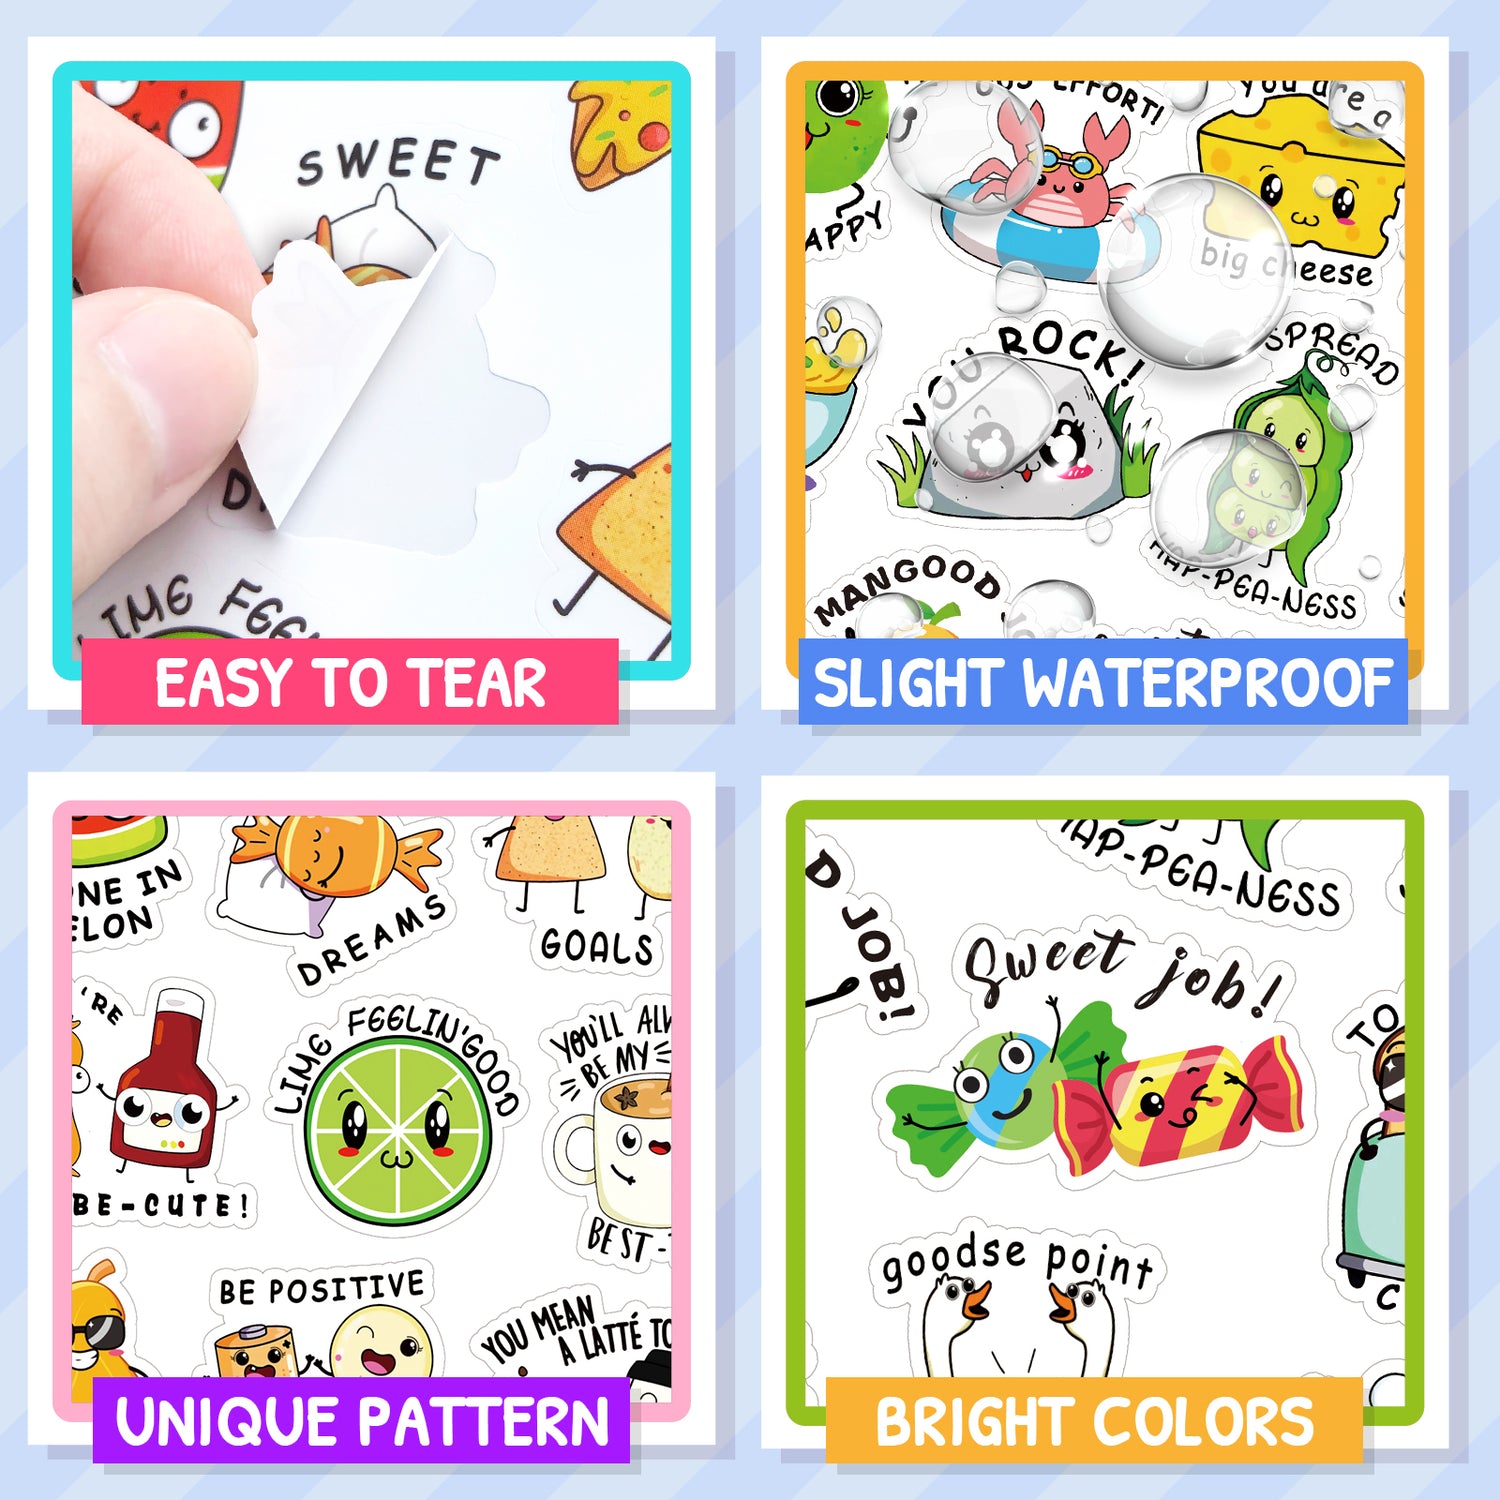 Perfect! Reward Stickers for Adults, Students Novelty product